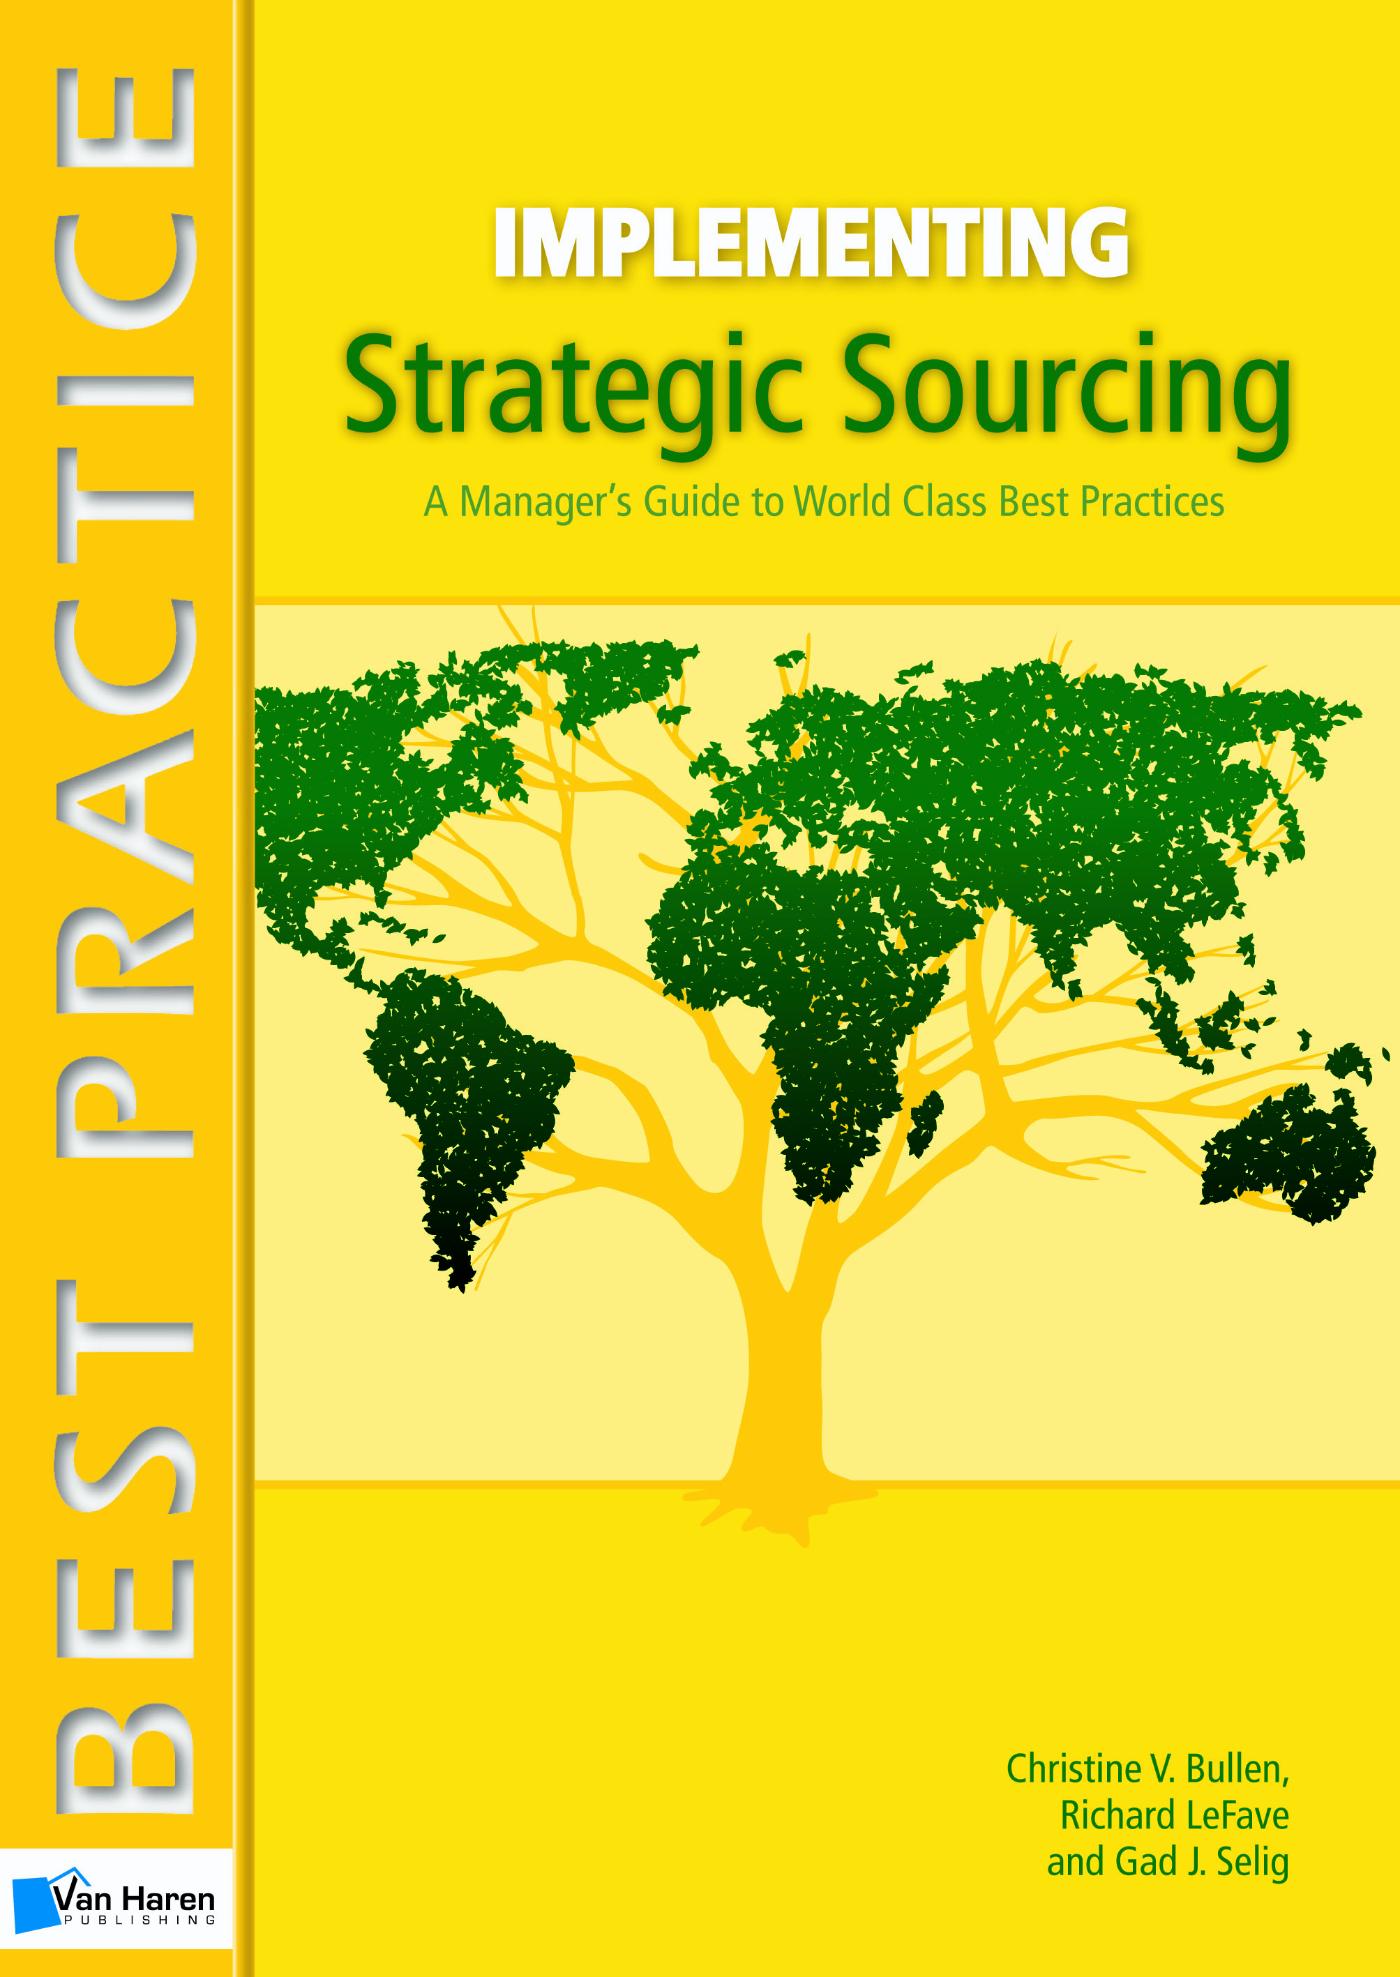 Implementing strategic sourcing (Ebook)